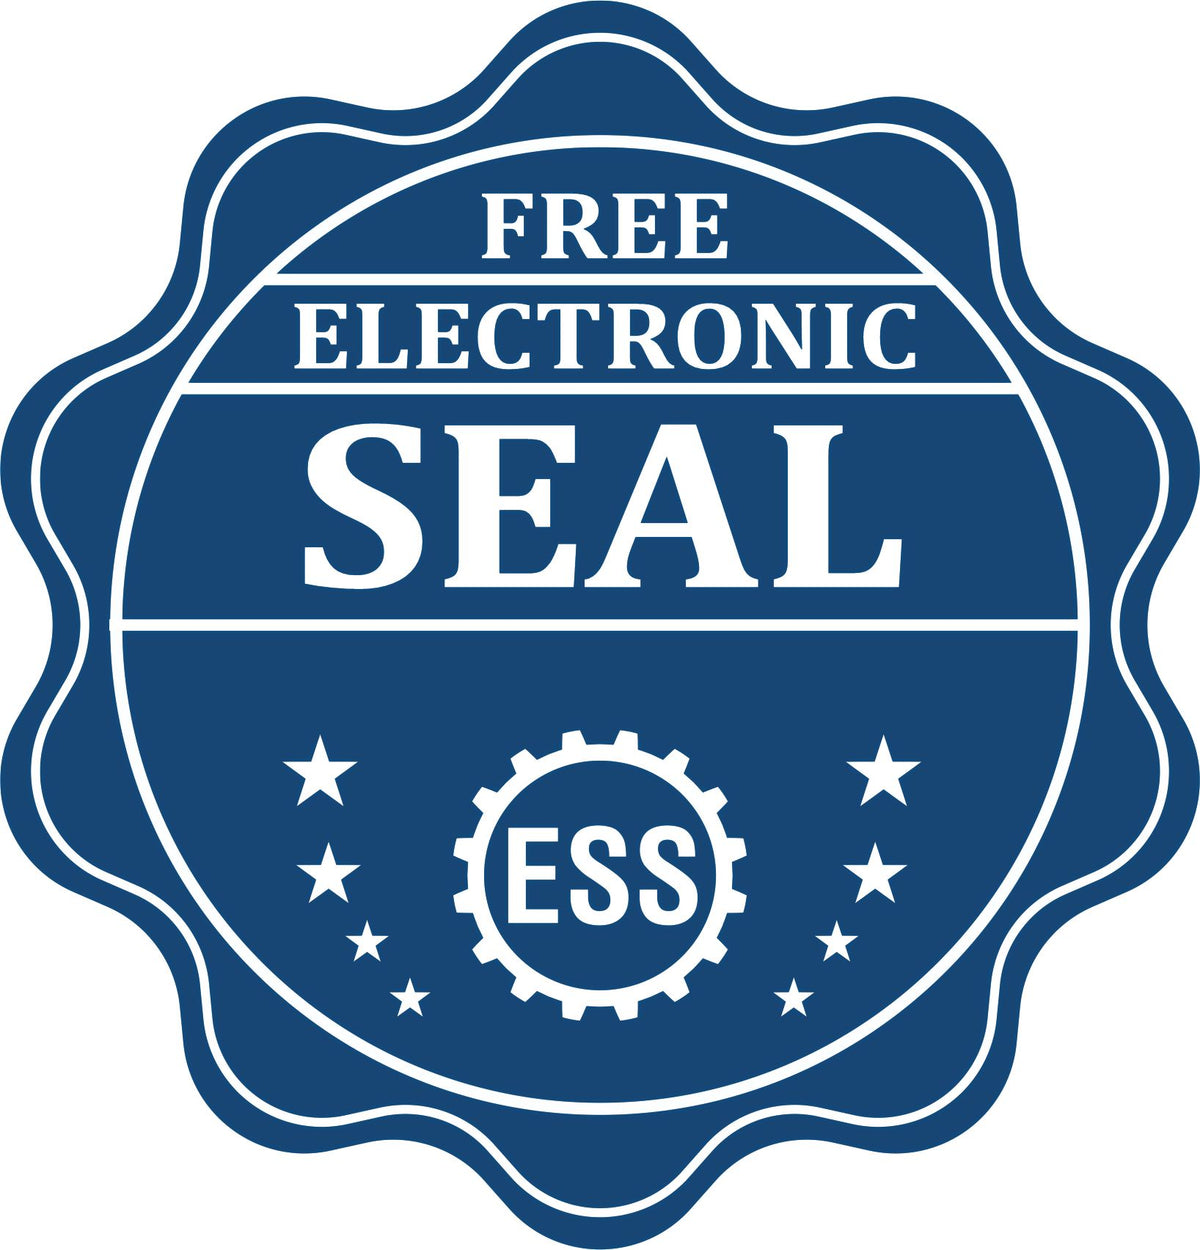 A badge showing a free electronic seal for the Premium MaxLight Pre-Inked Florida Engineering Stamp with stars and the ESS gear on the emblem.